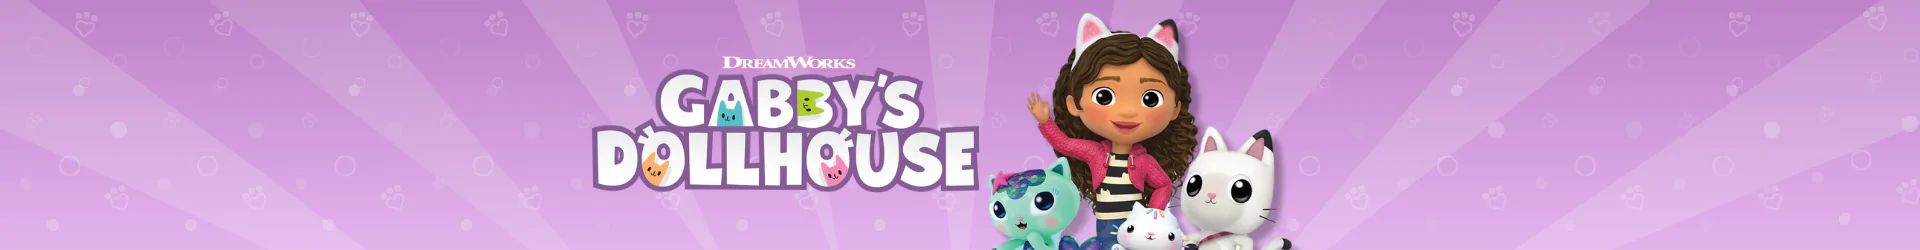 Gabbys Dollhouse products banner